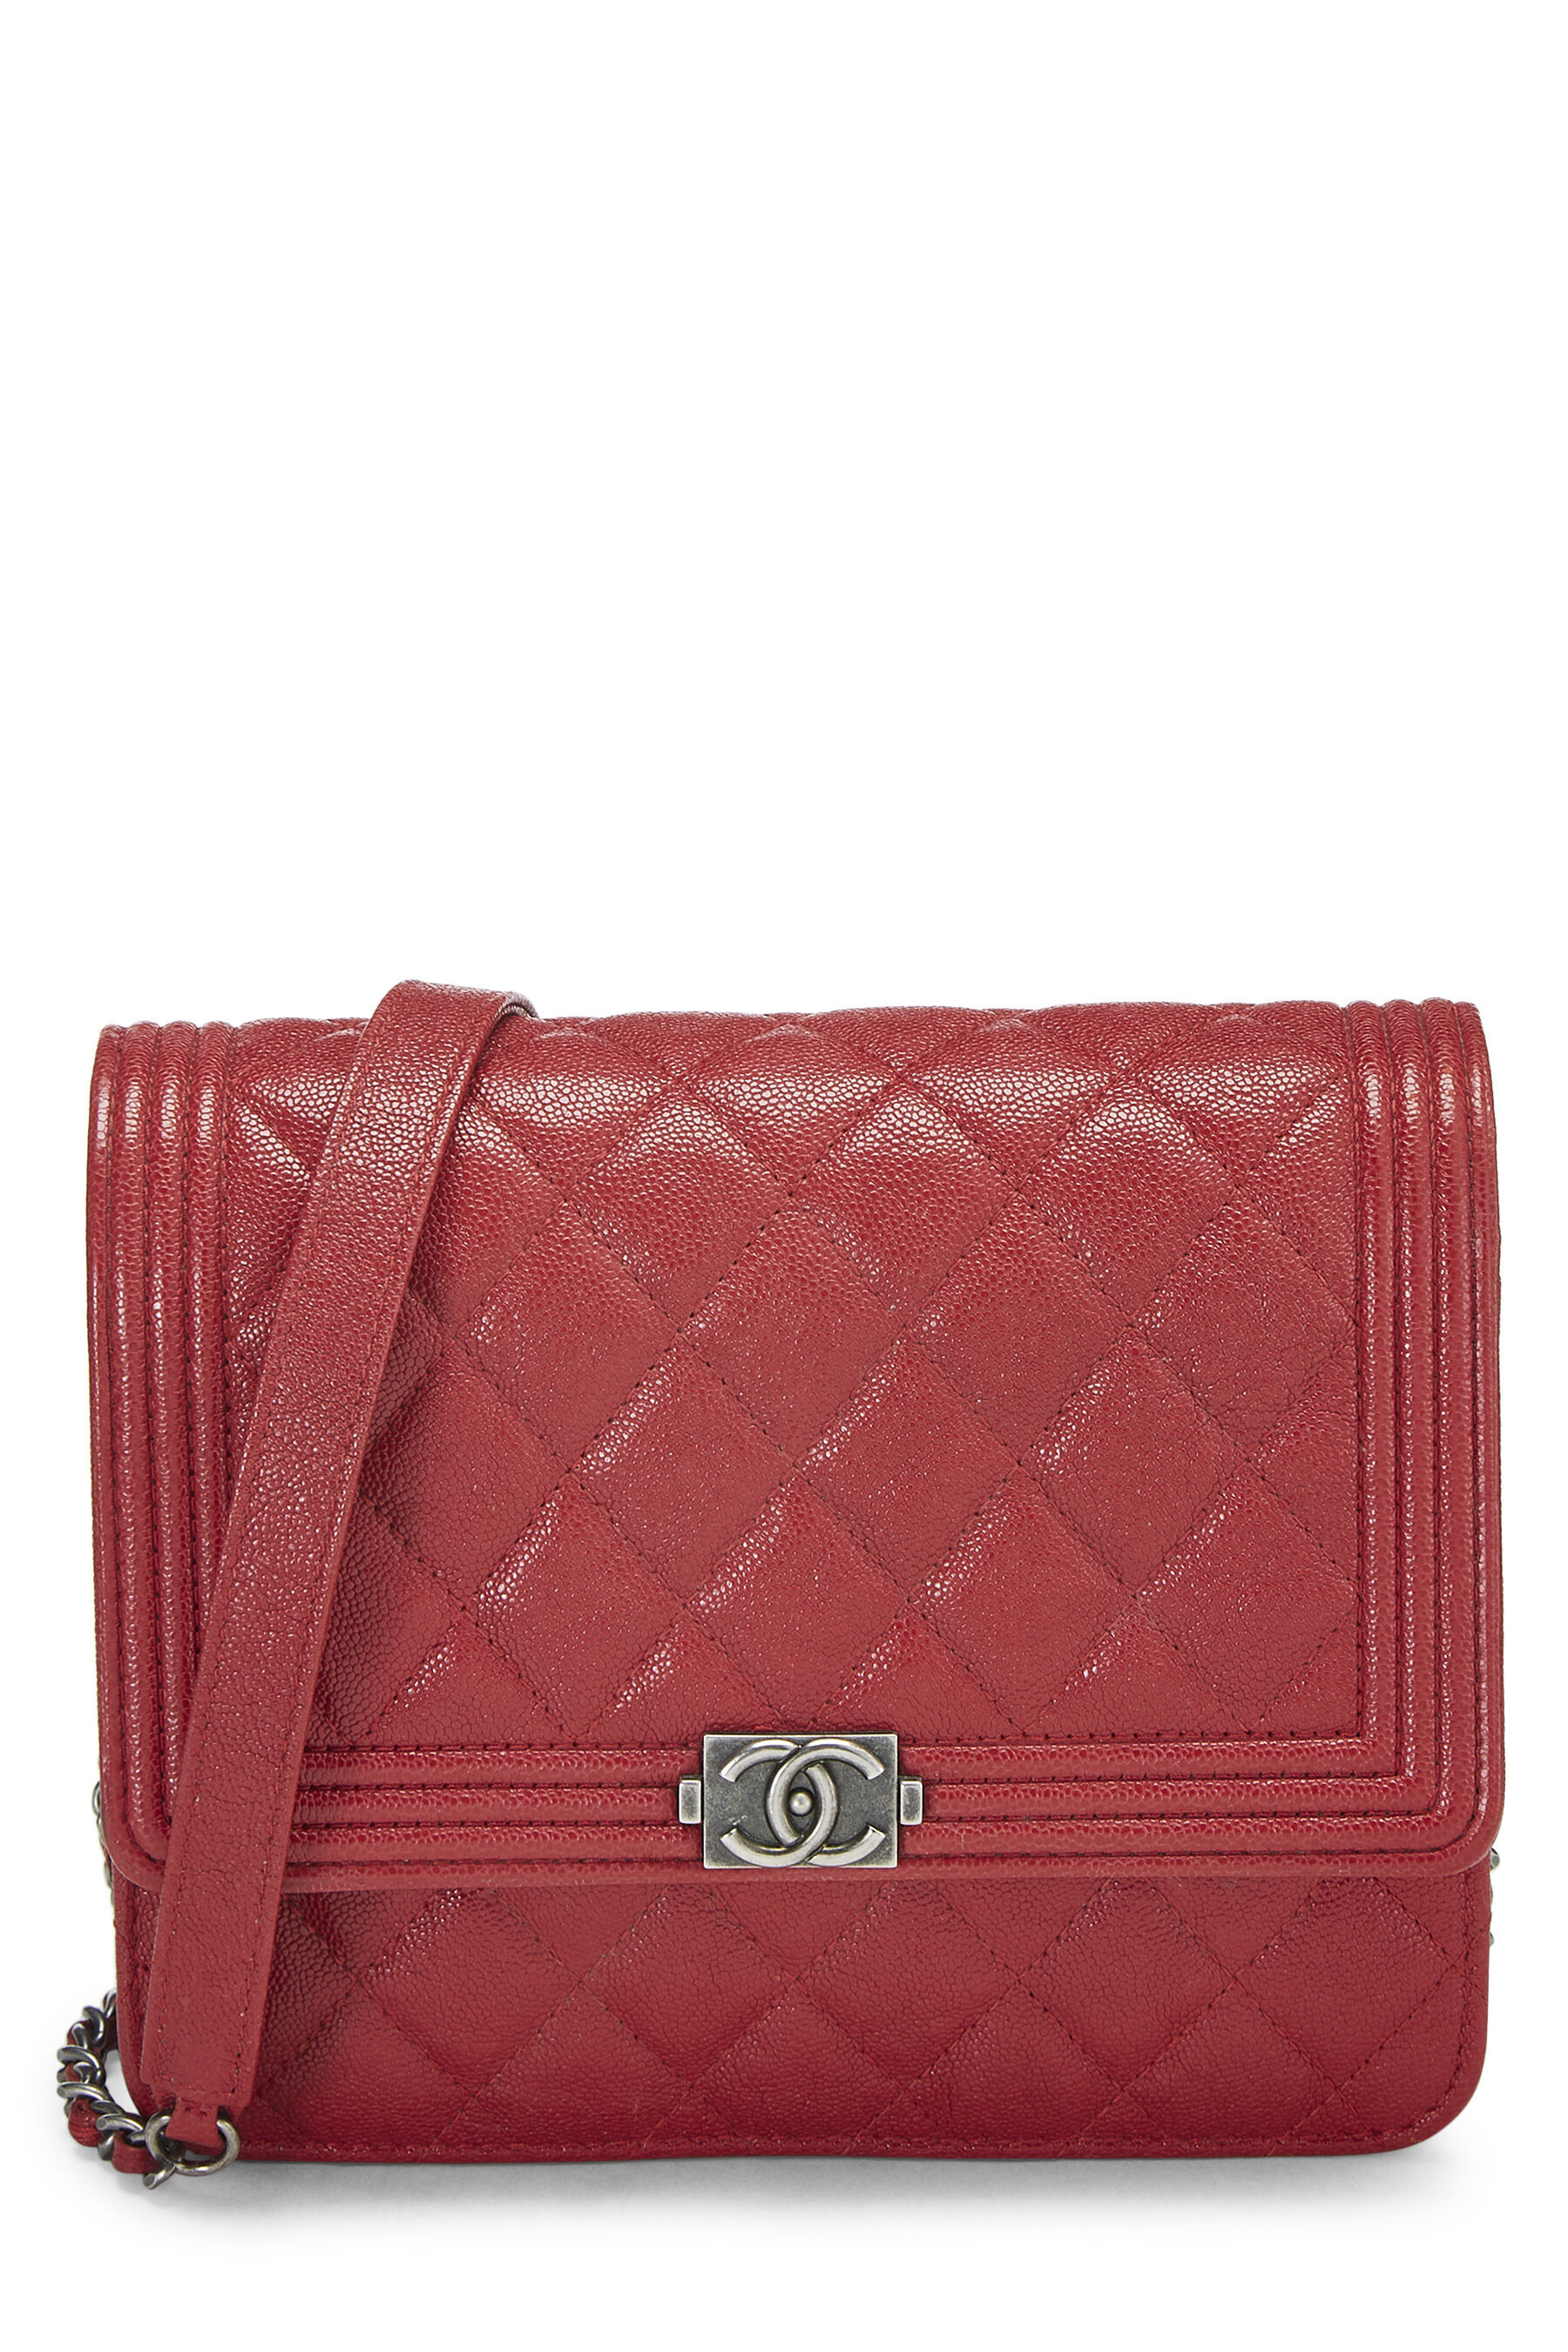 Chanel Dark Red Diamond Quilted Lambskin Leather Trendy WOC Clutch Bag   Yoogis Closet